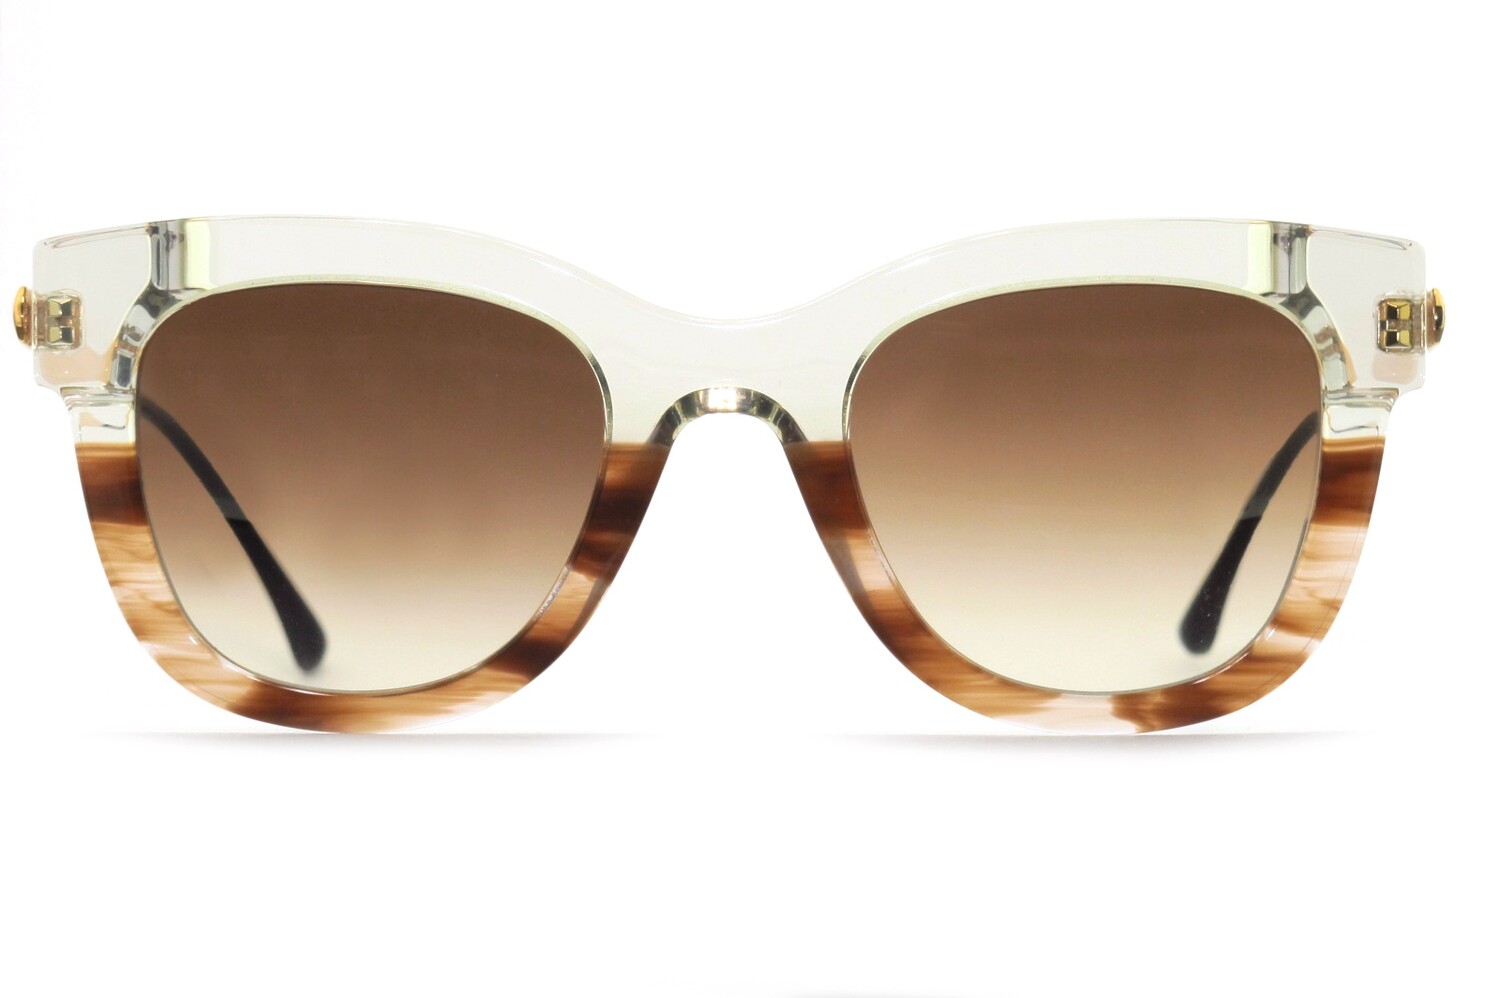 Sexxxy by Thierry Lasry